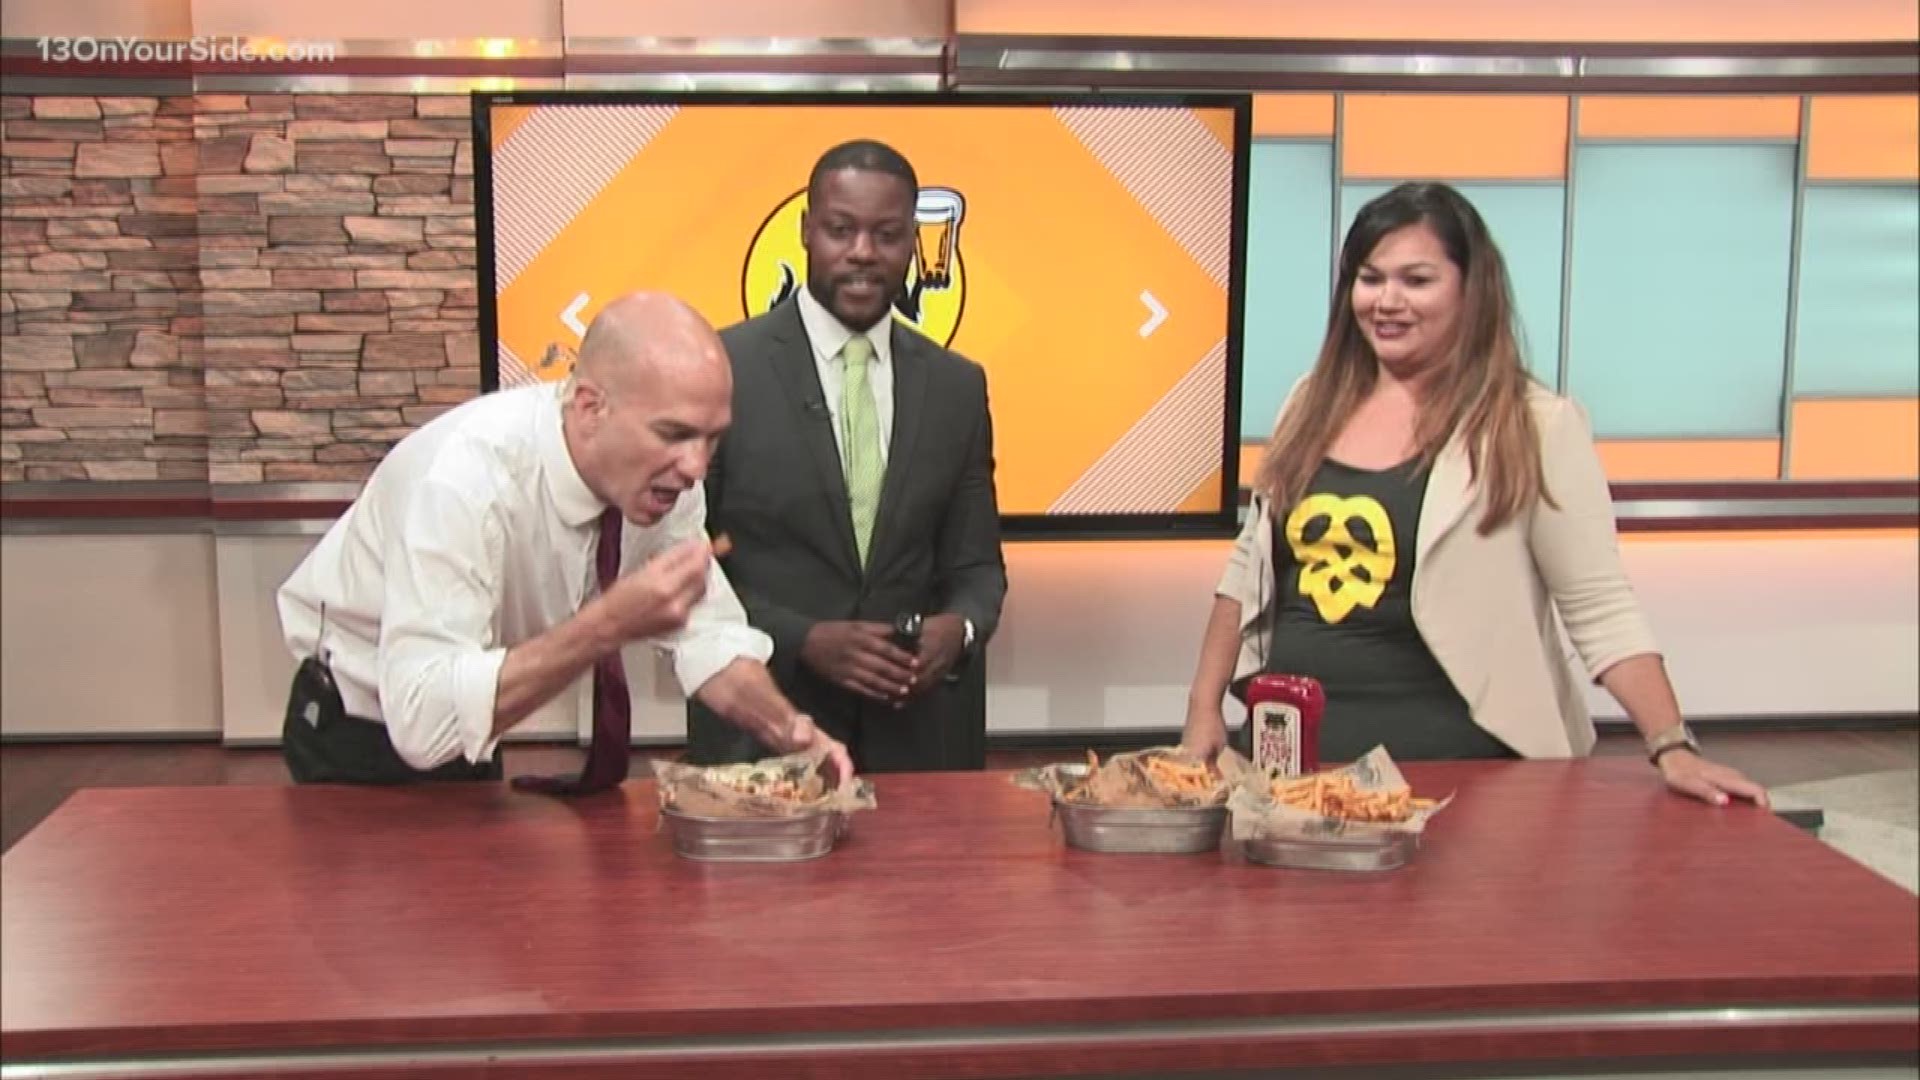 The 13 ON YOUR SIDE Morning crew couldn't wait to celebrate National French Fry Day, which is Saturday, July 12. We had HopCat come in and share some fries and fast facts this morning.